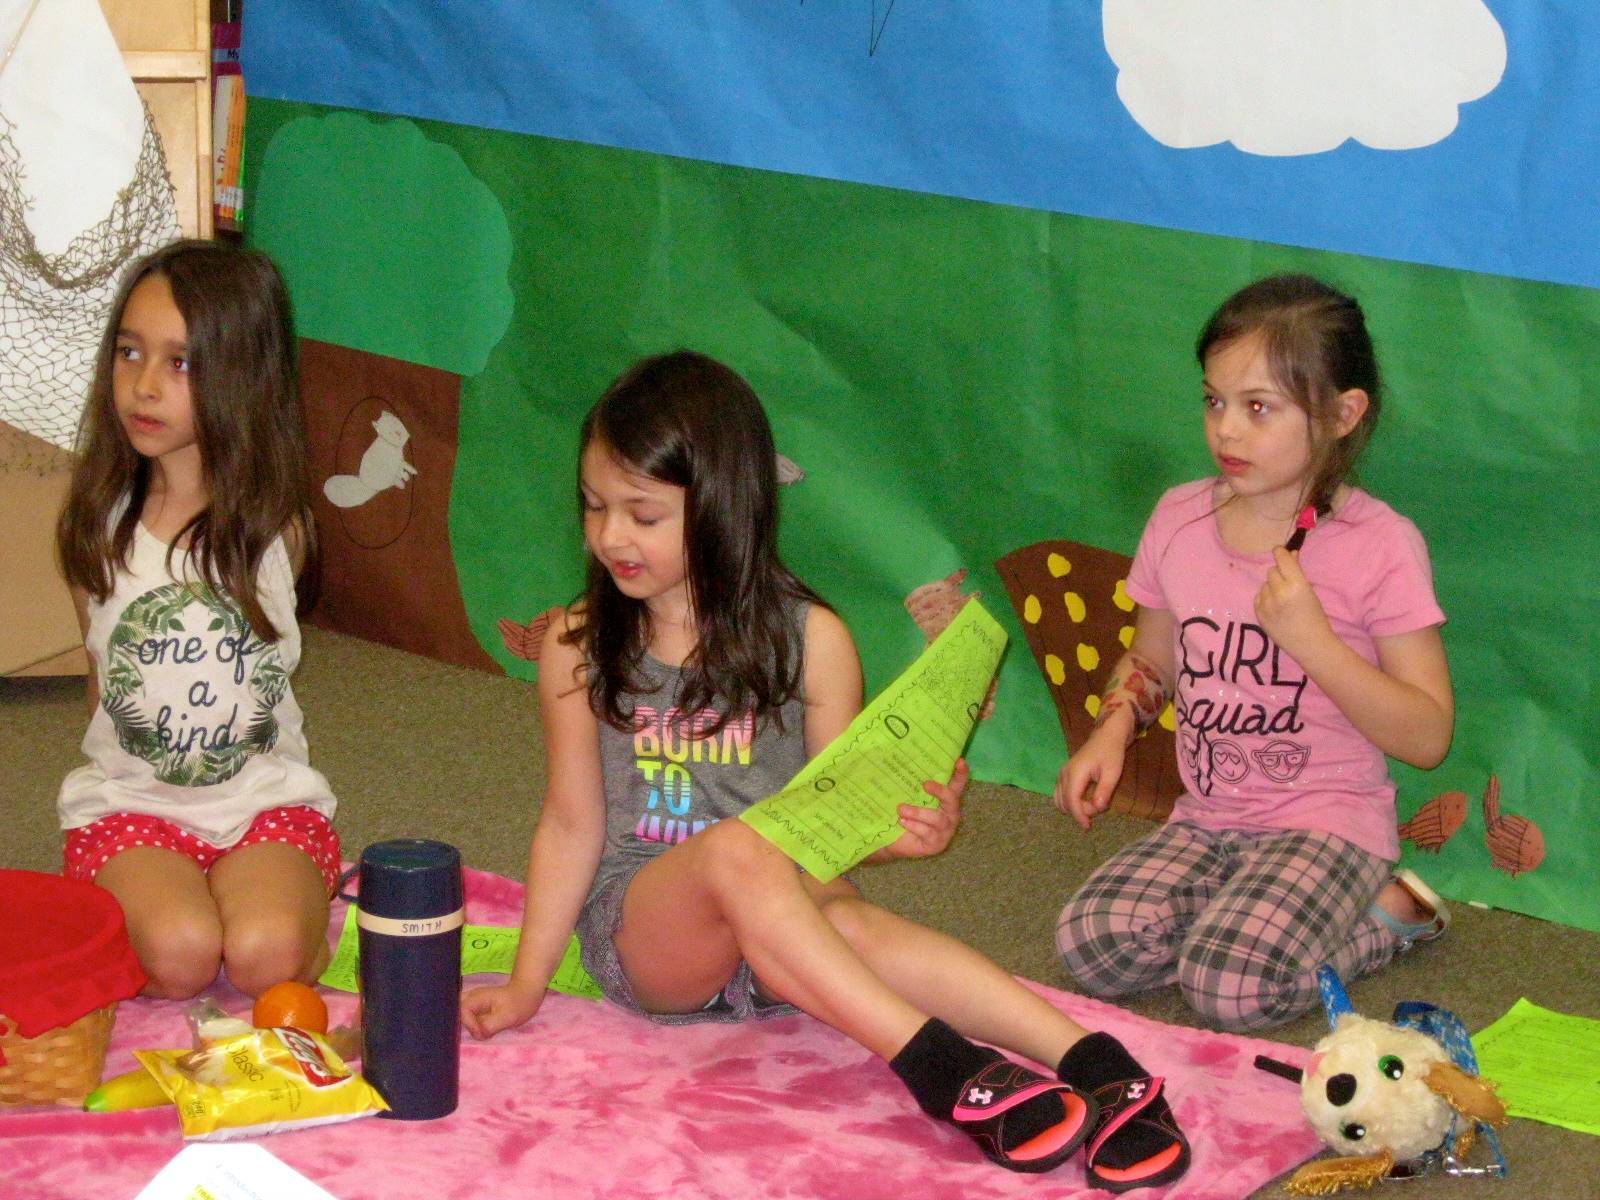 3 first graders show what items to bring for a picnic.